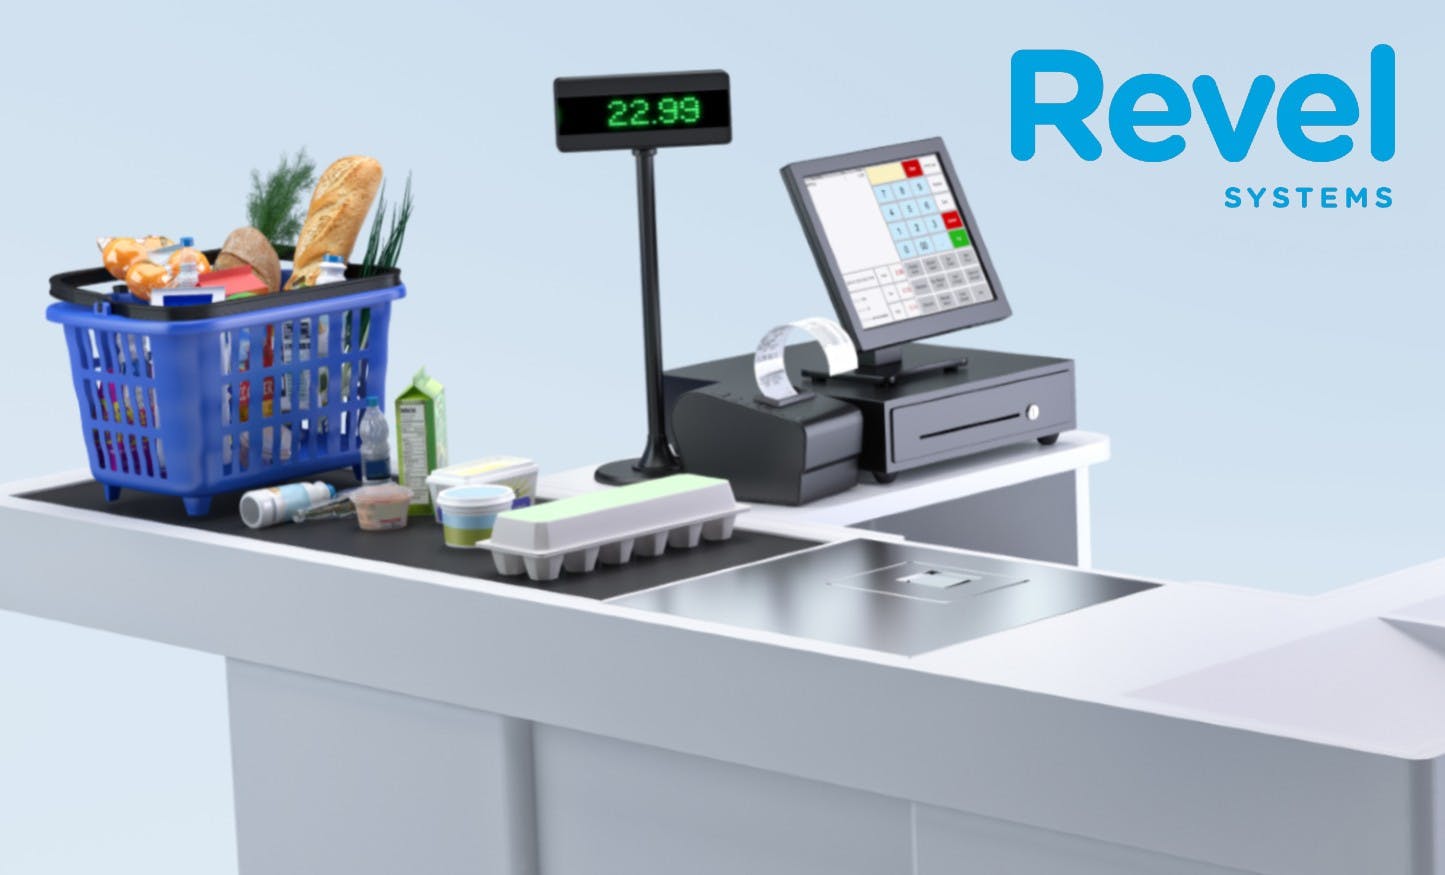 Revel Systems: The Leading POS System